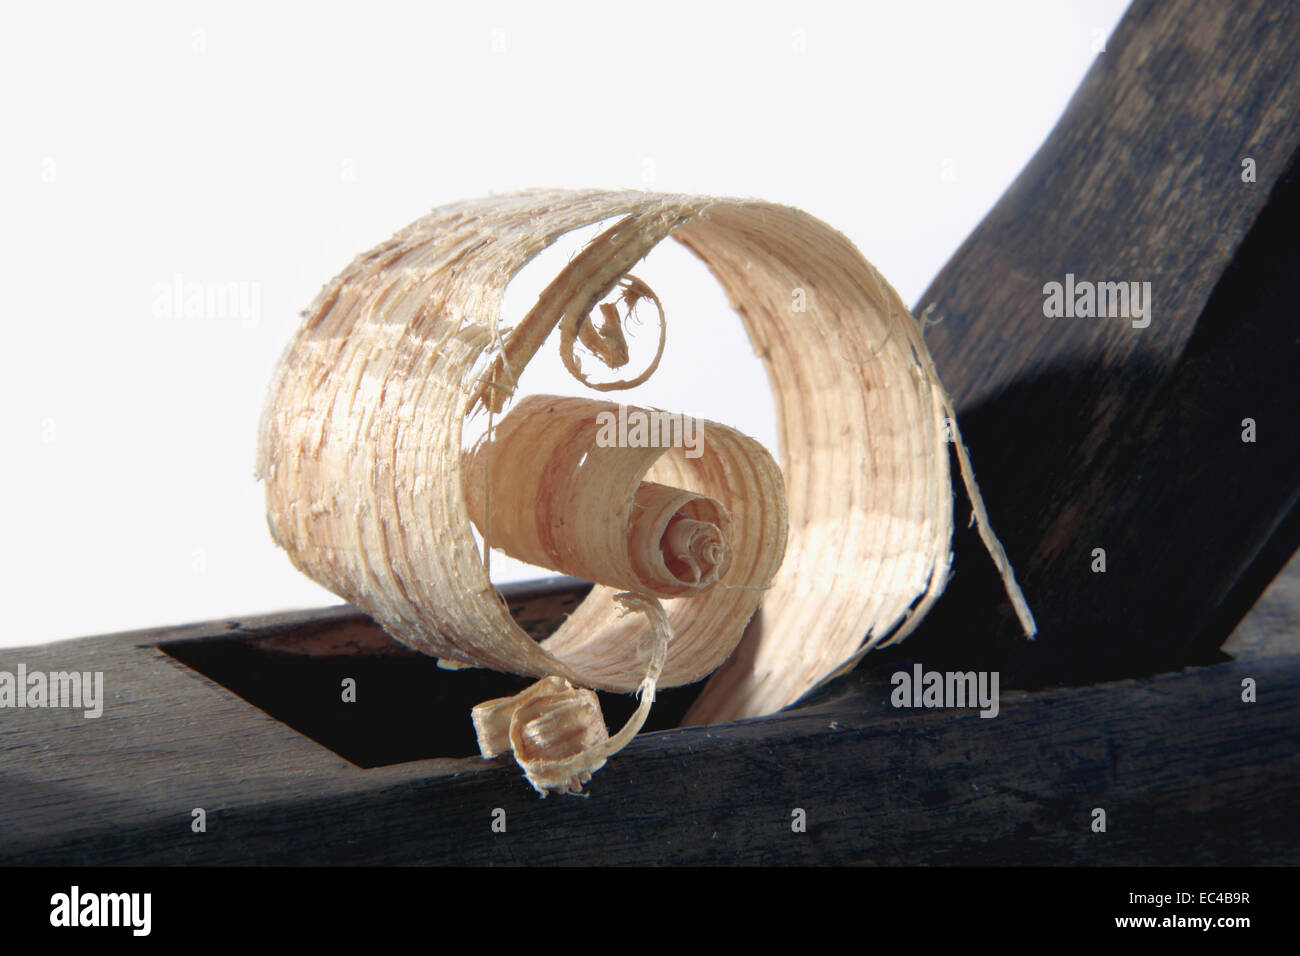 antique plane with wood shavings Stock Photo